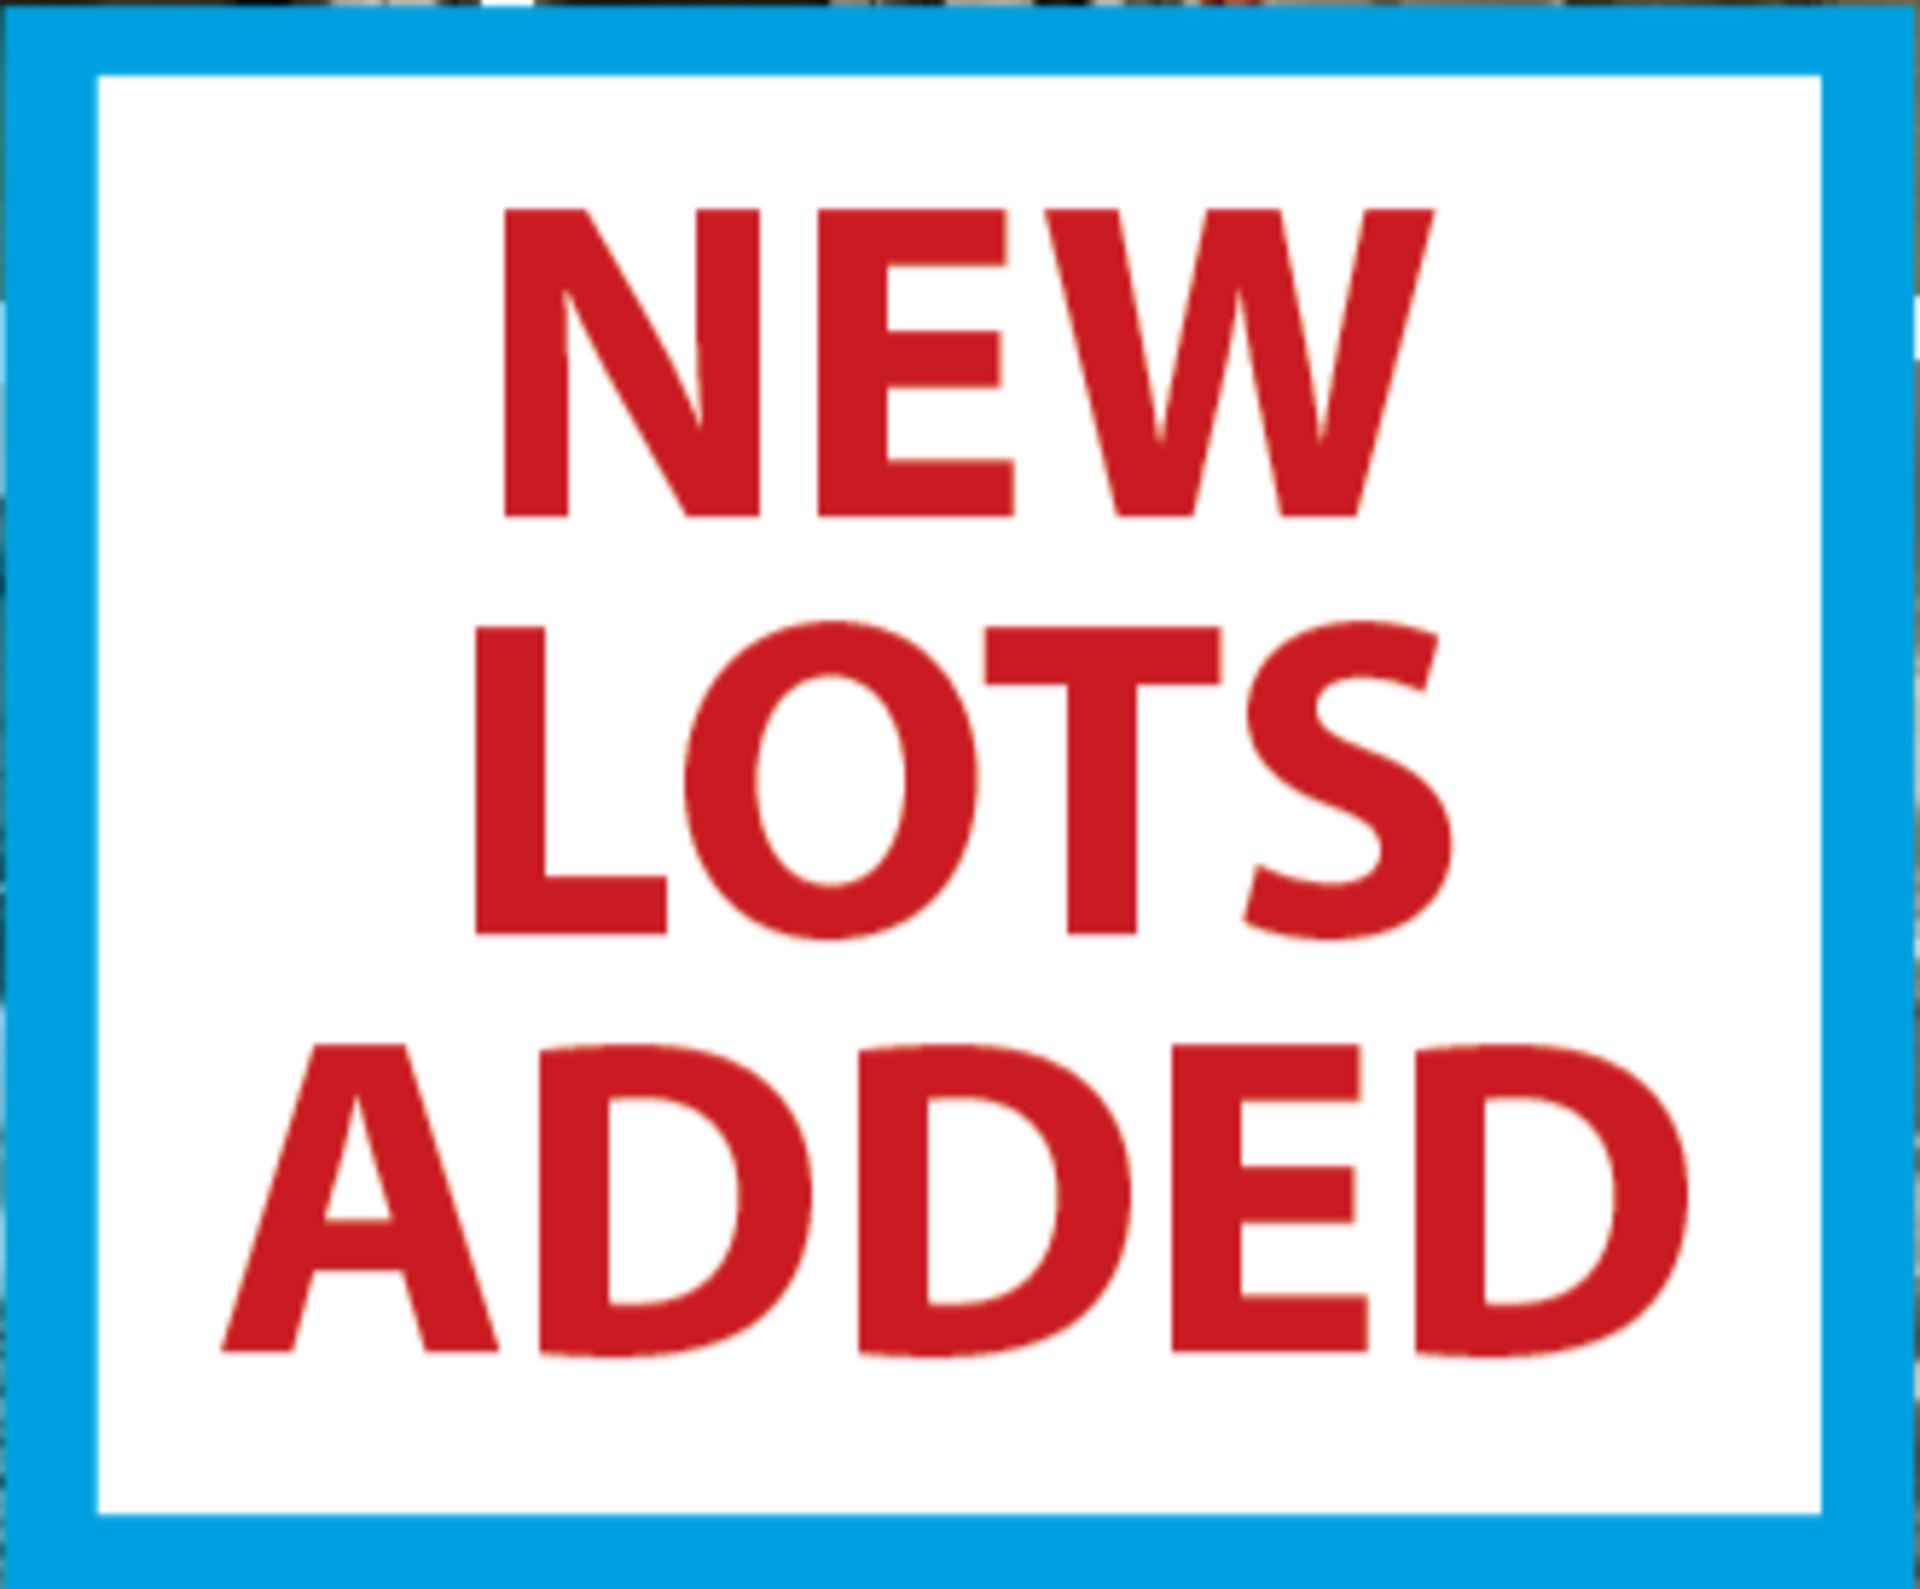 NEW LOTS ADDED. TAKE A LOOK!